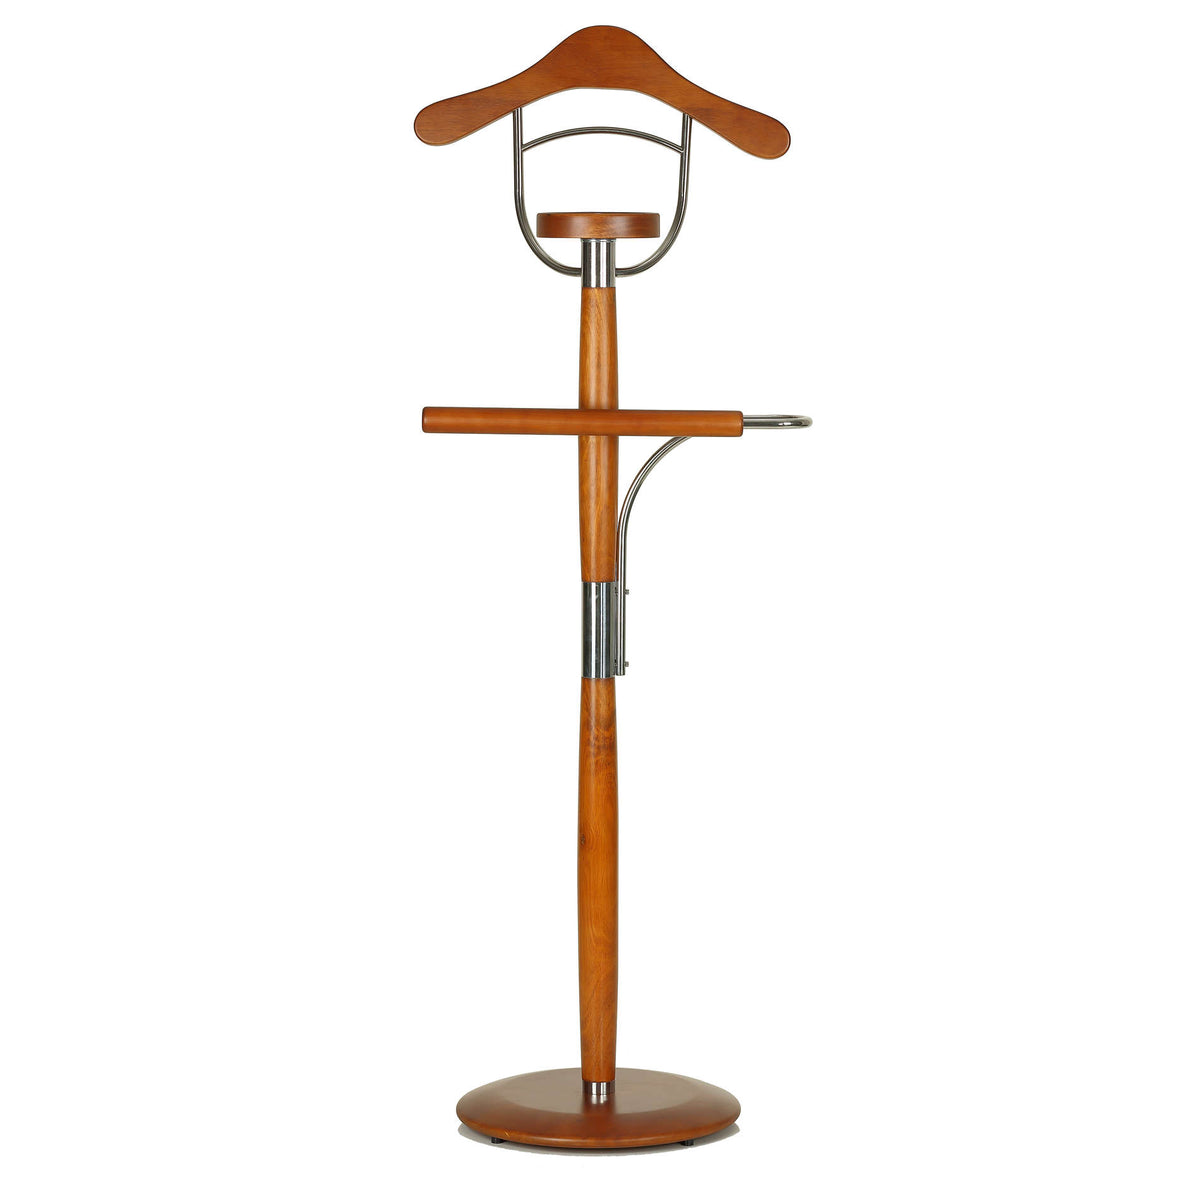 Cortesi Home Asheton Suit Valet Stand in Cherry Wood with Wood Base